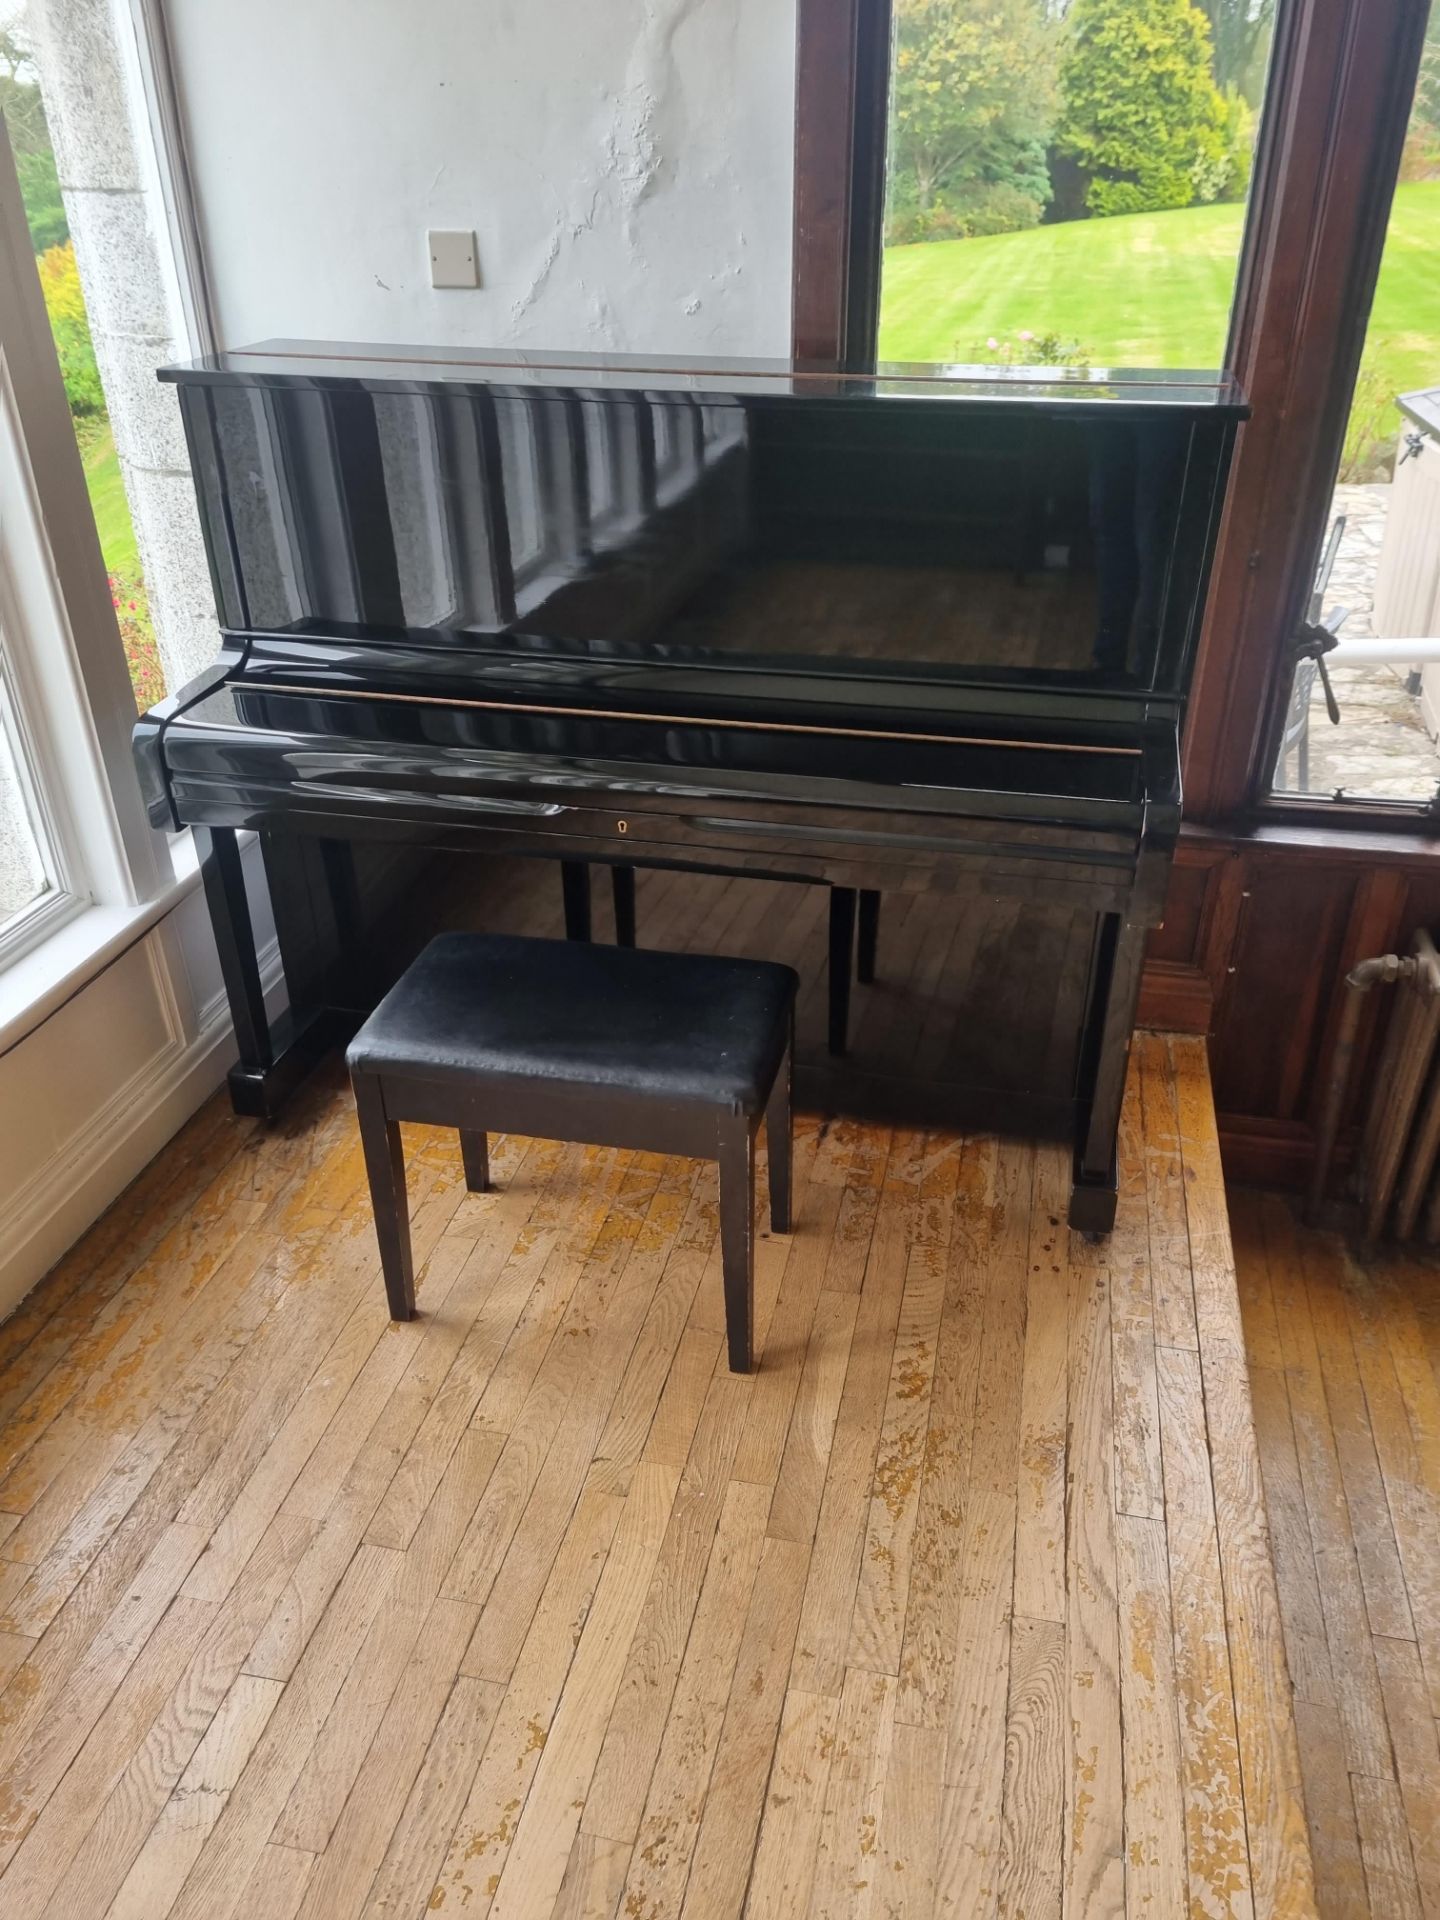 Young Chang Akki Co. Korea Model U-1 Upright Strung Piano In Black Laquer Complete With Piano - Image 7 of 9